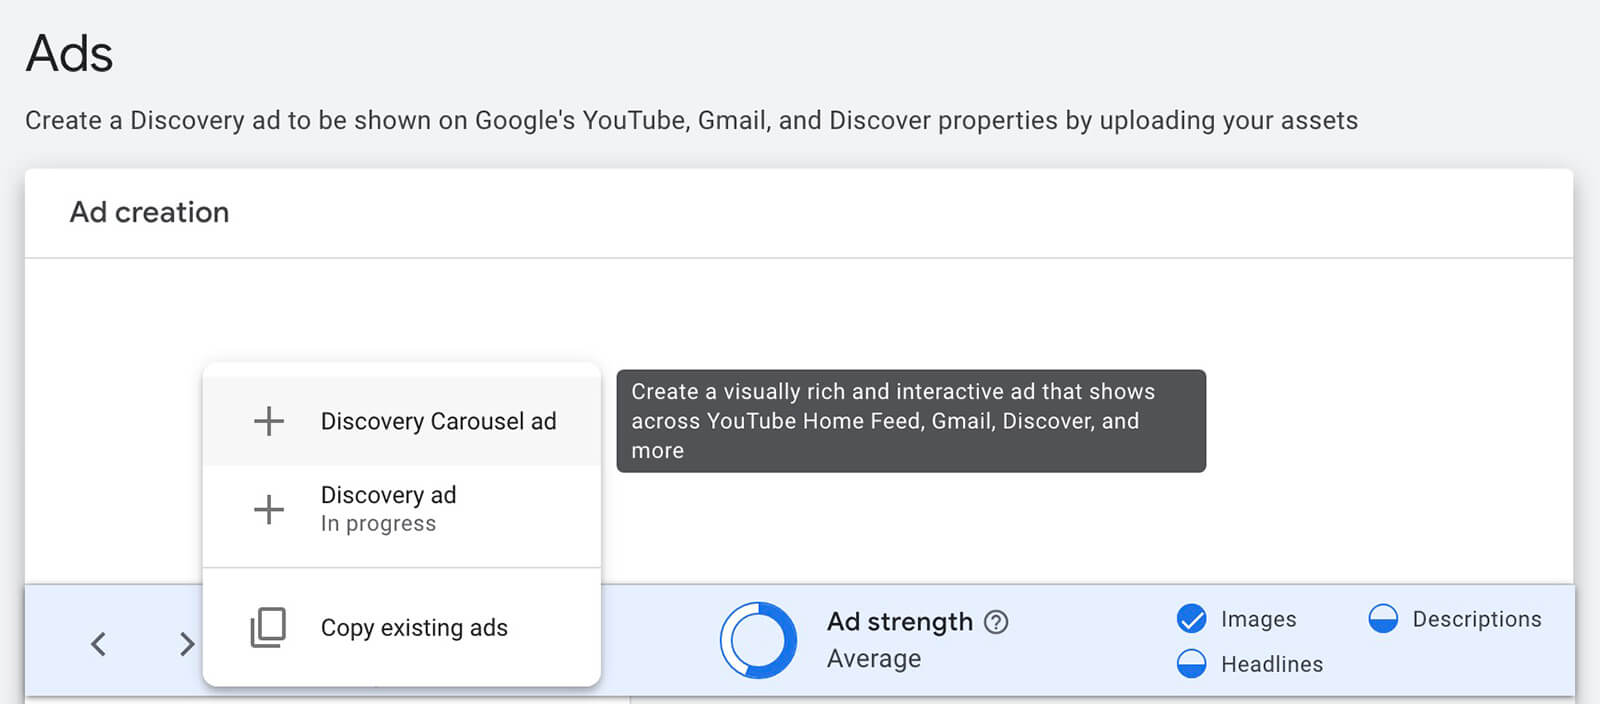 warm-up-youtube-ads-audiences-with-google-discovery-ads-leverage-new-tools-carousel-ad-creation-15